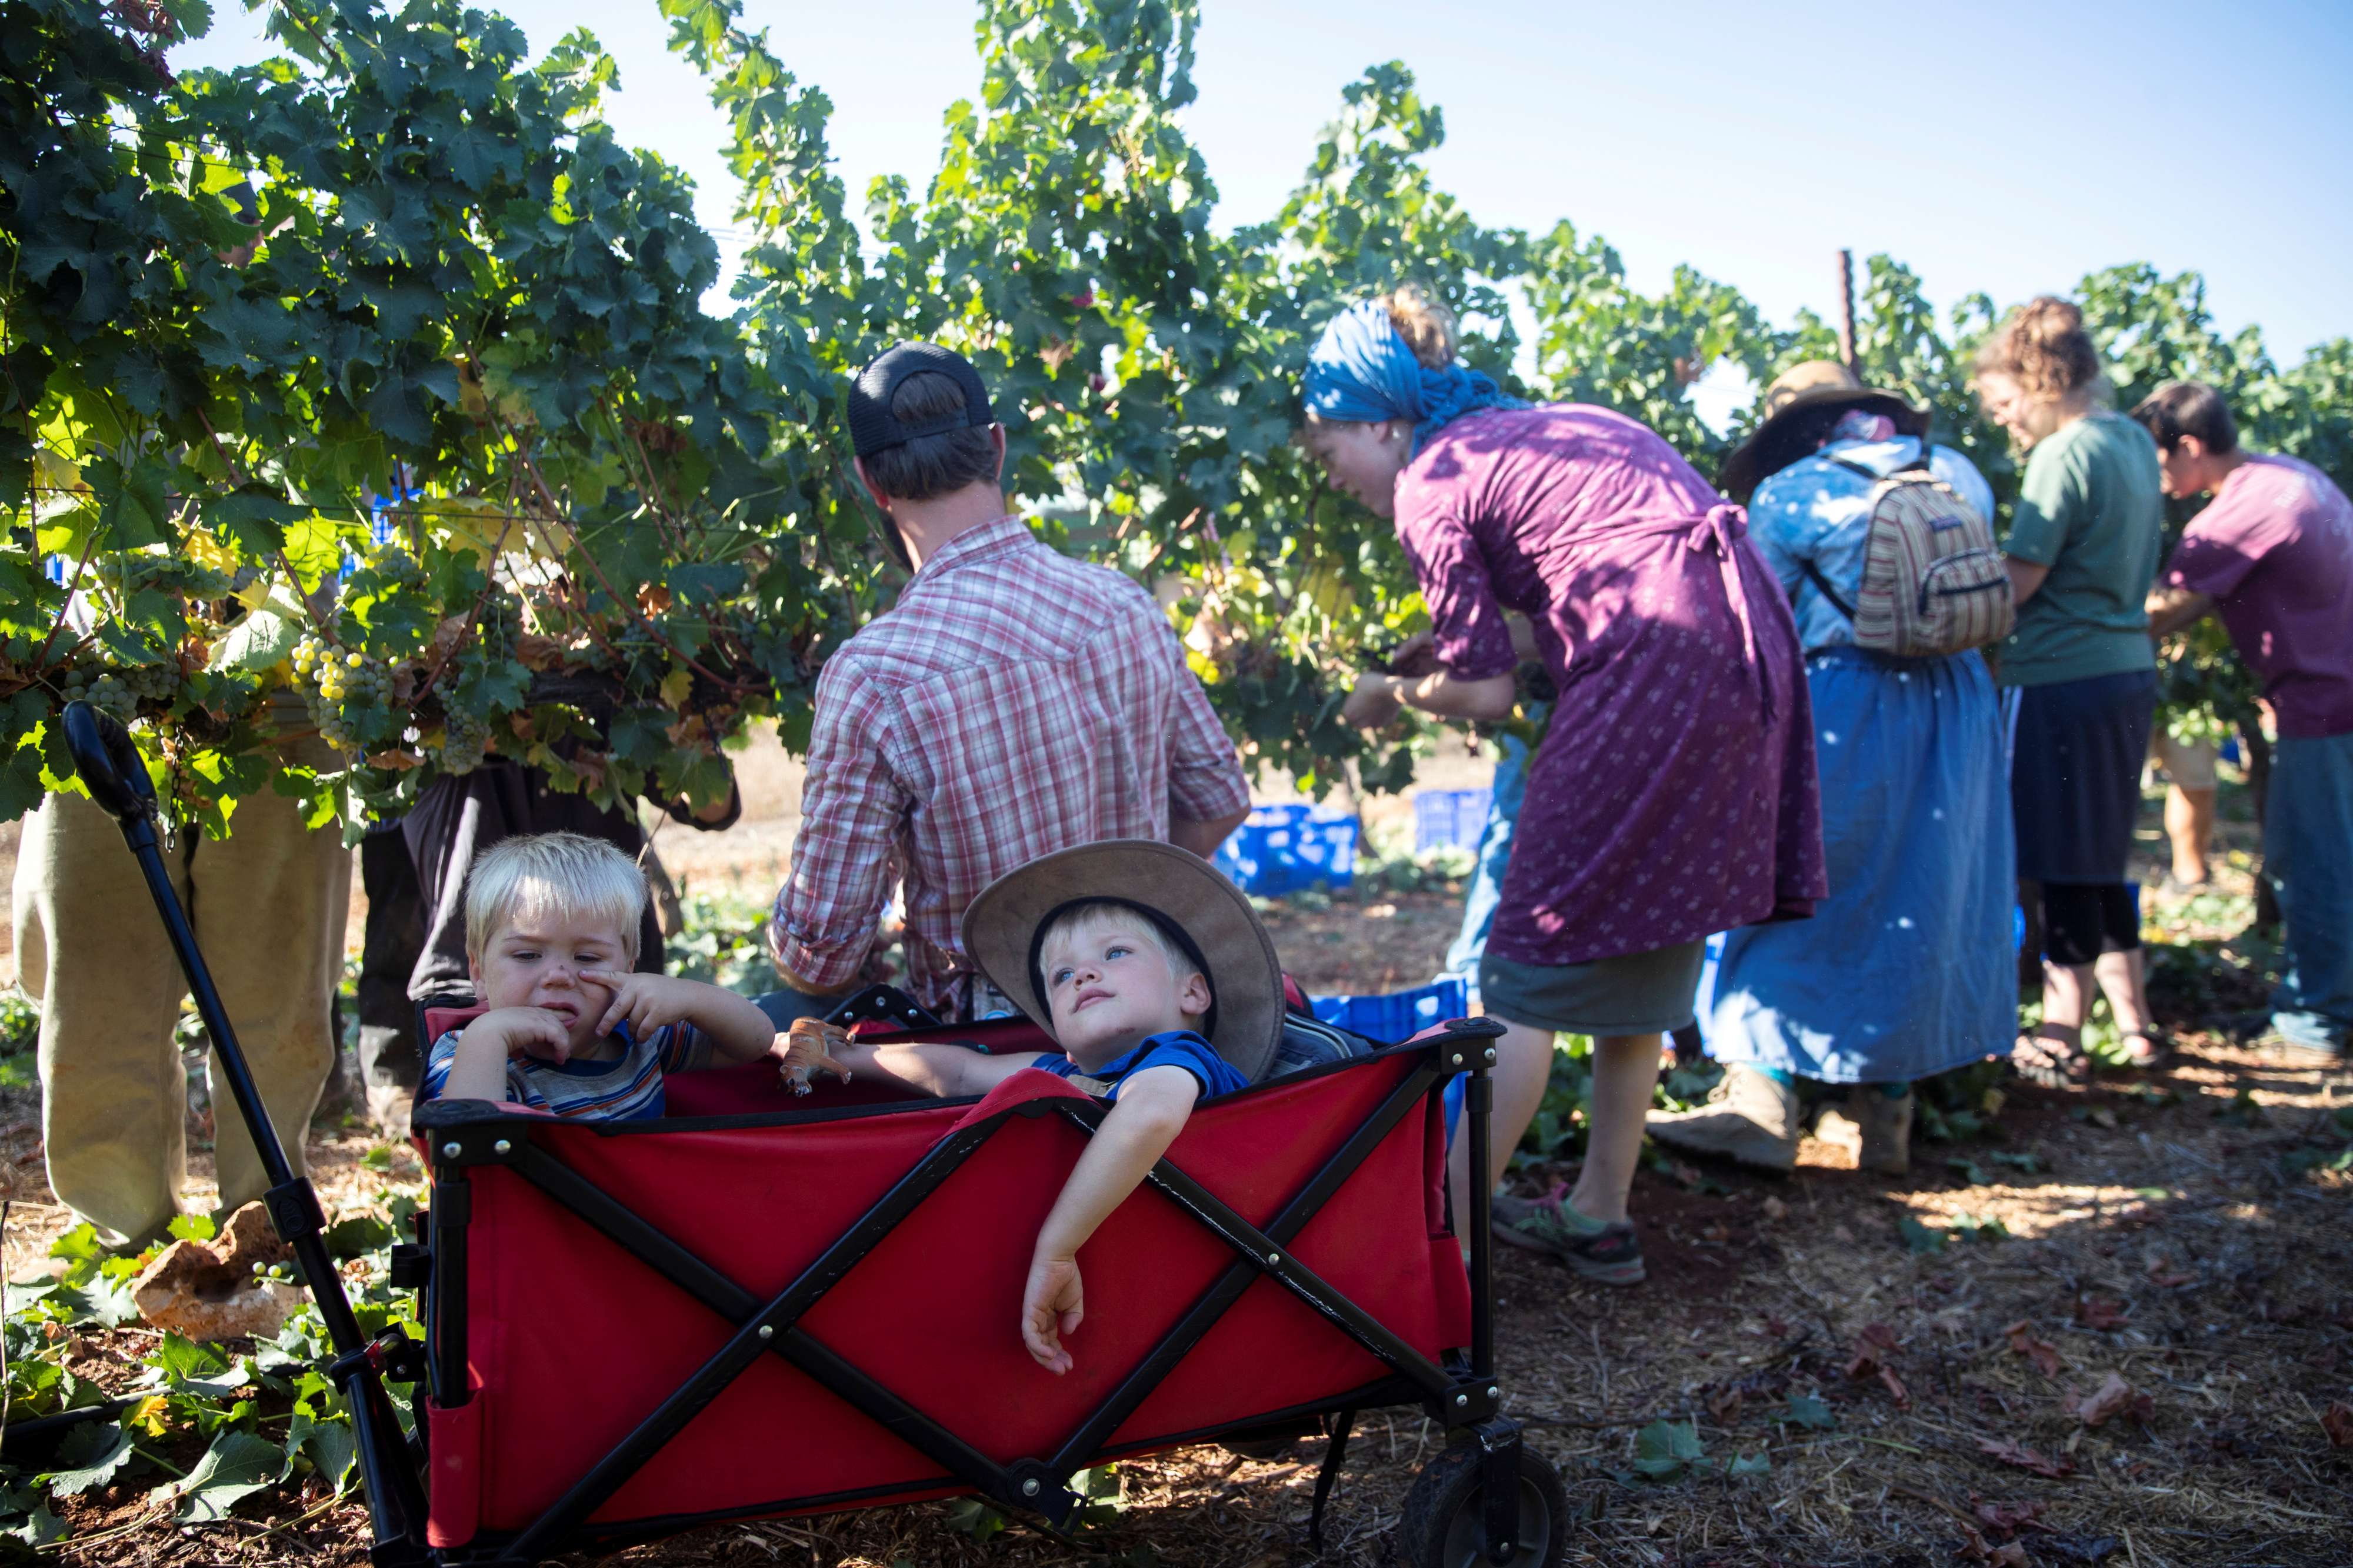 Volunteers of the U.S.based Christian group HaYovel harvest grapes at a vineyard on the outskirts of Har Bracha settlement in the Israeli-occupied West Bank